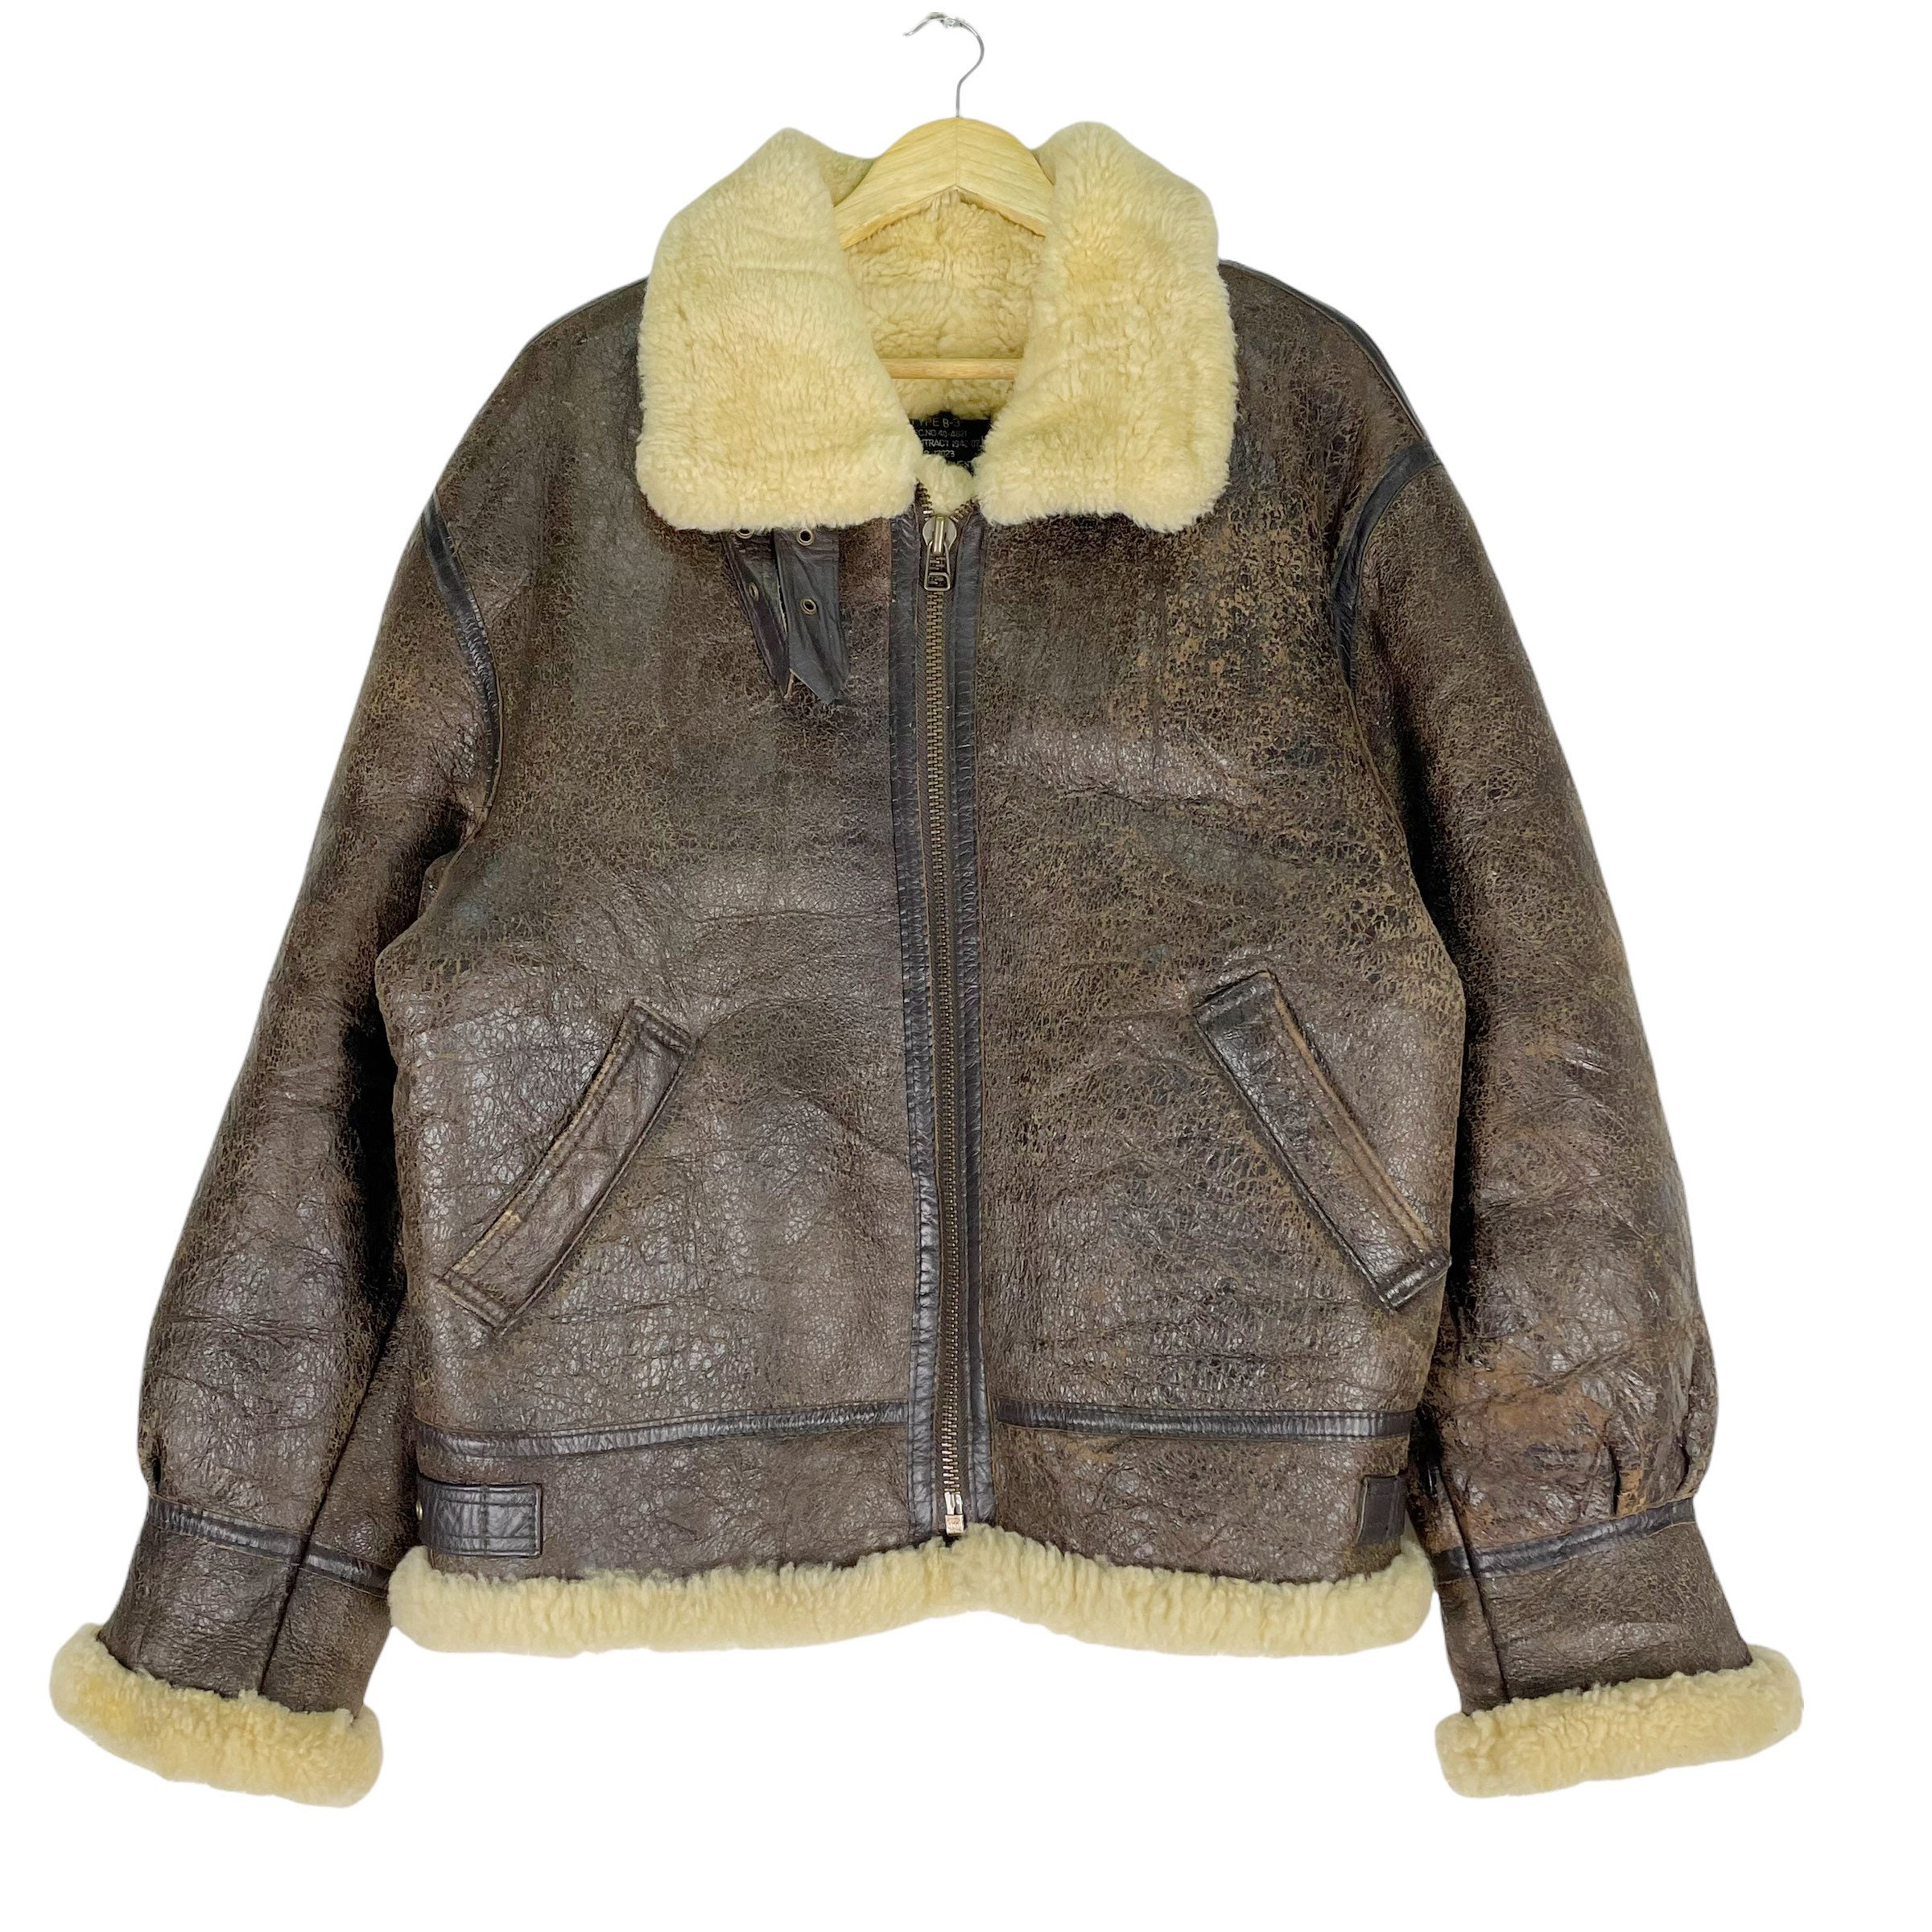 Vintage 90s Flight Equipment Type B3 Us Army Air Force Shearling ...